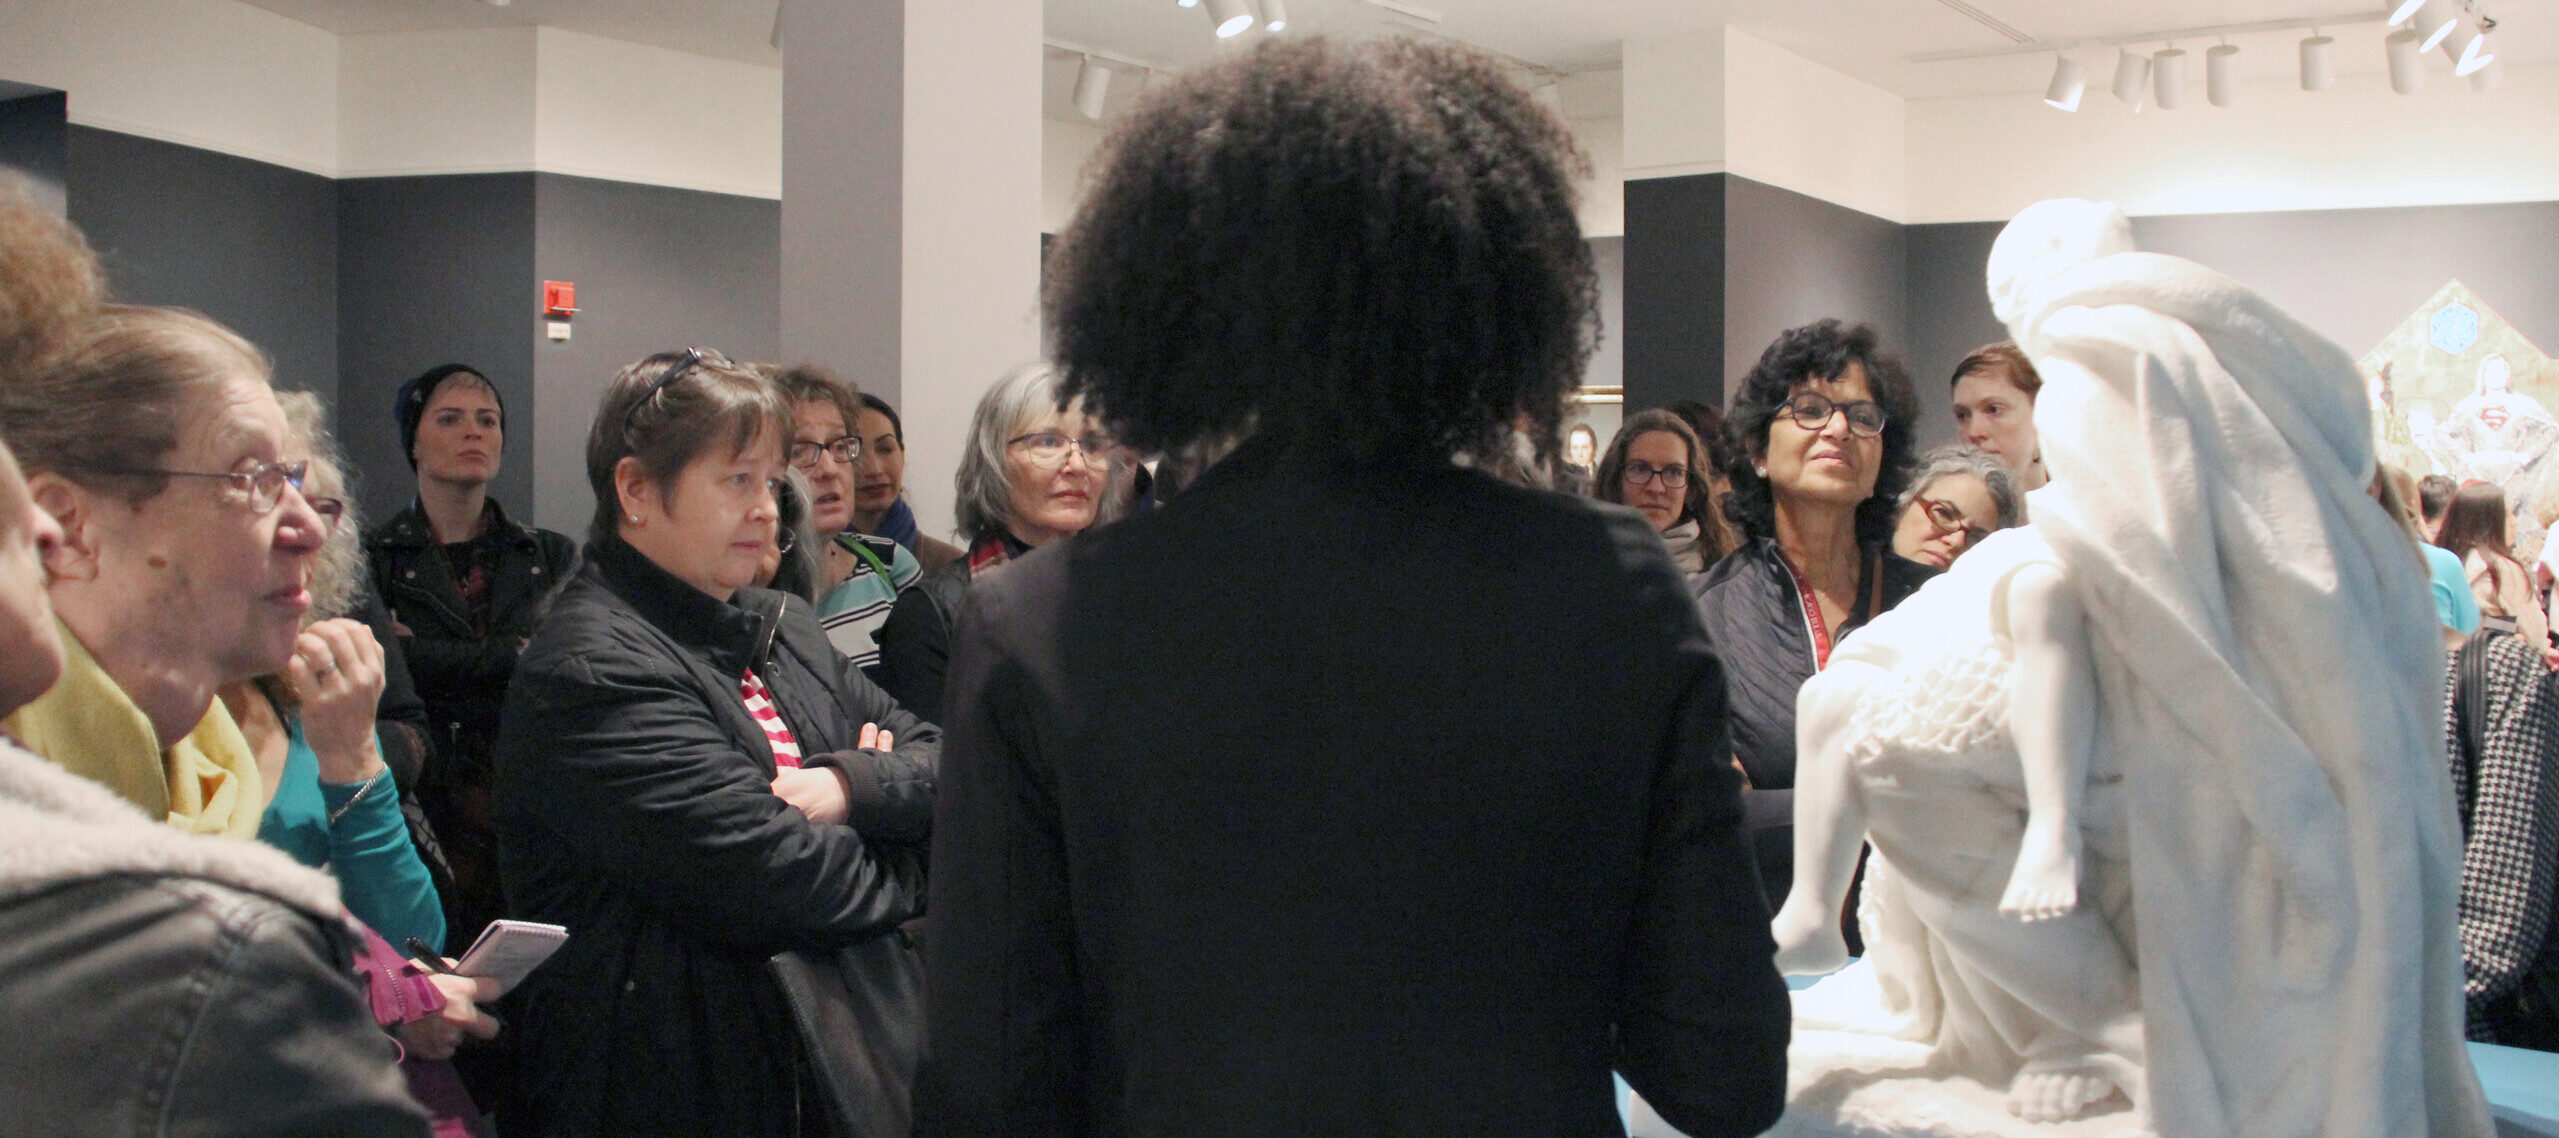 NMWA educator with dark curly hair speaks to a large crowd of visitors about a large marble sculpture.